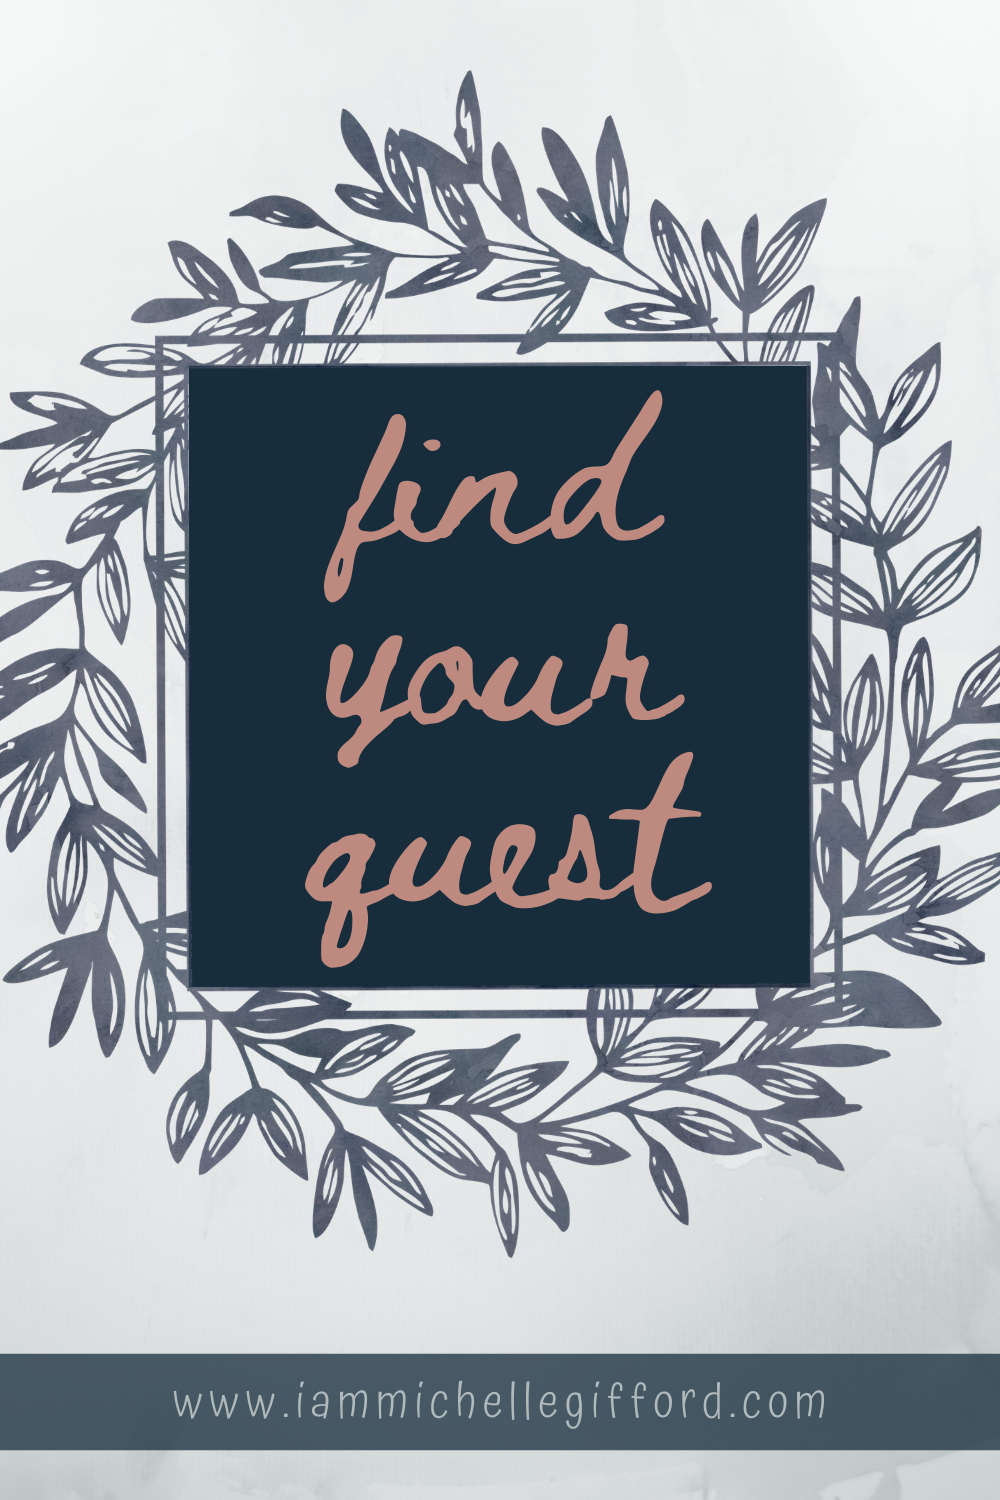 Find your Quest Podcast Recap- Find Your Quest www.iammichellegifford.com